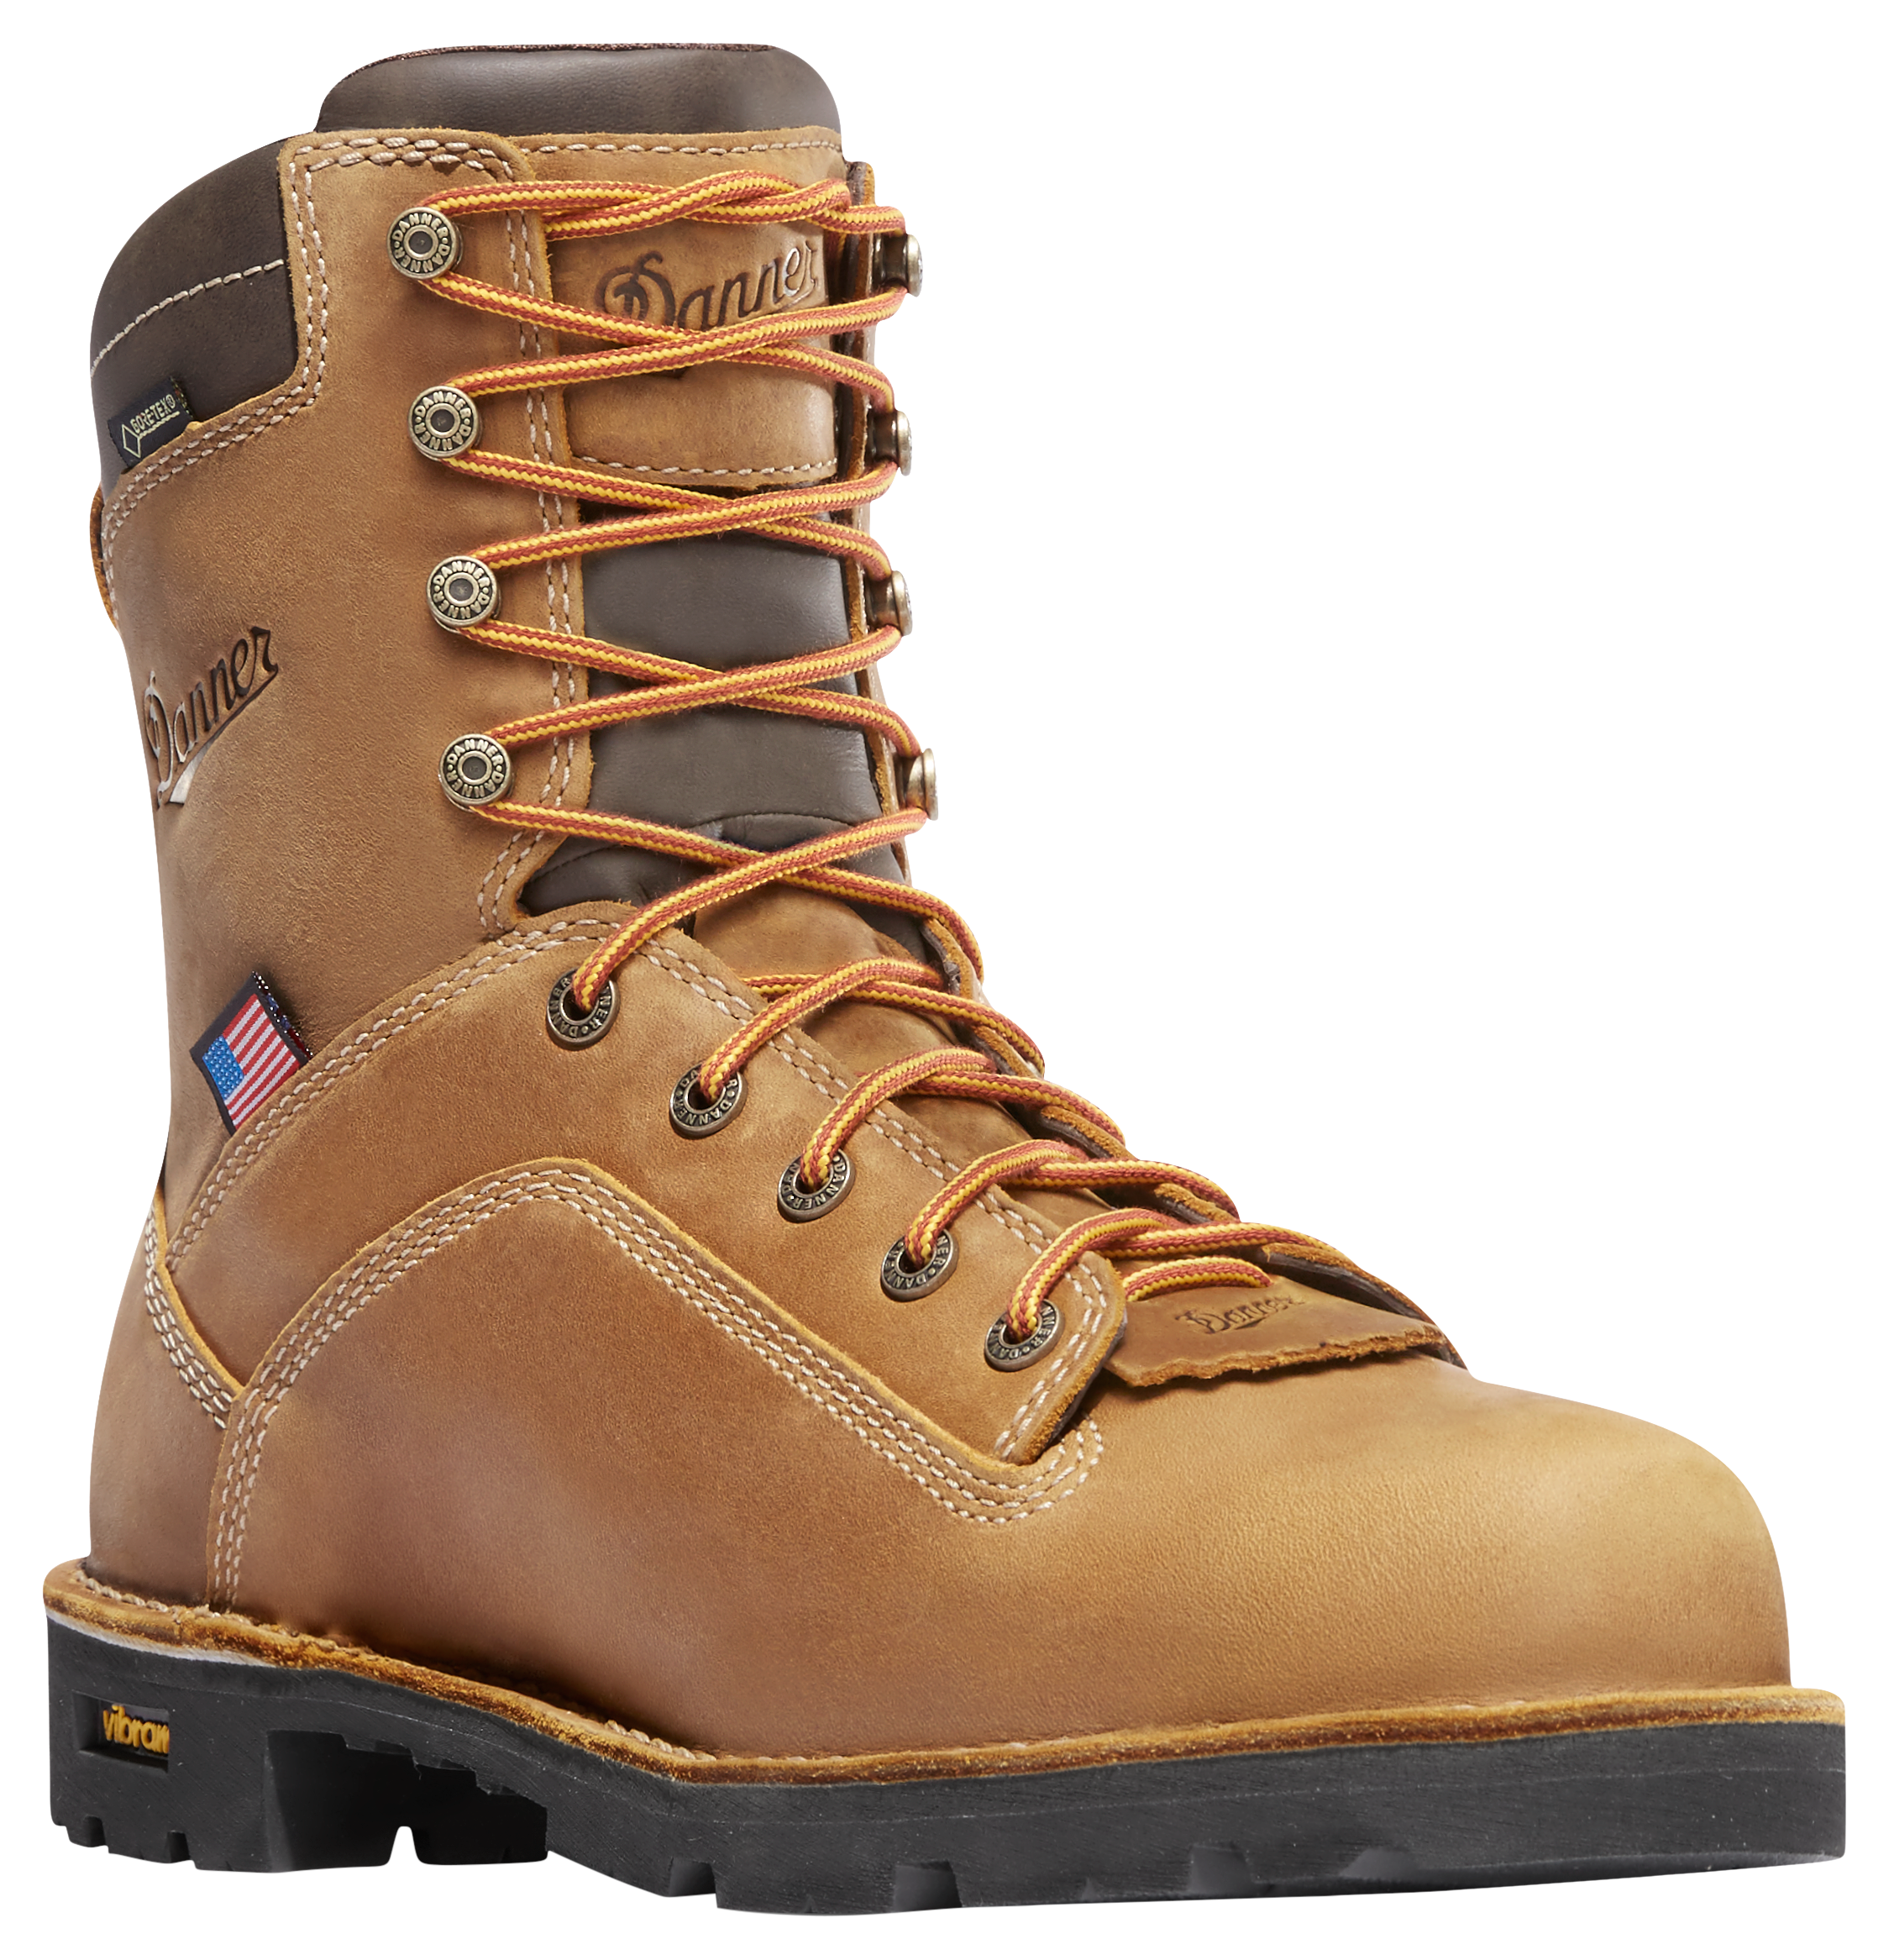 Danner Quarry USA GORE-TEX Insulated Composite Toe Work Boots for Men - Distressed Brown - 13M